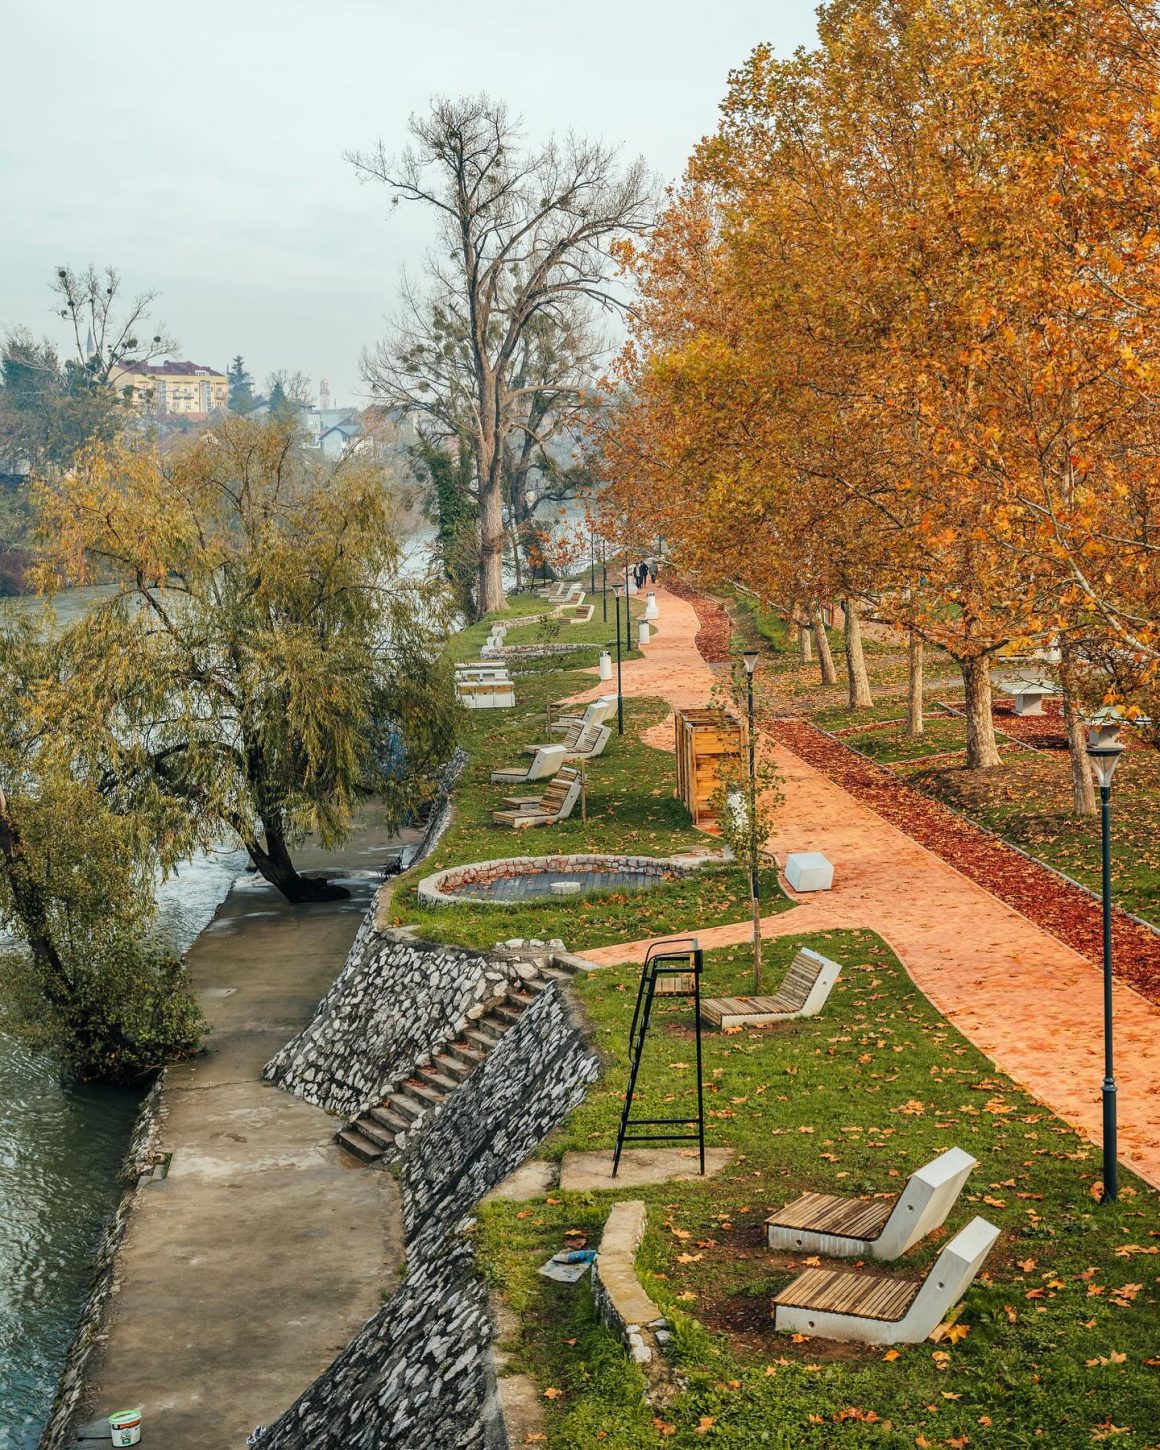 All works completed: Magical autumn appearance of the beach between the City Bridge and the Green Bridge